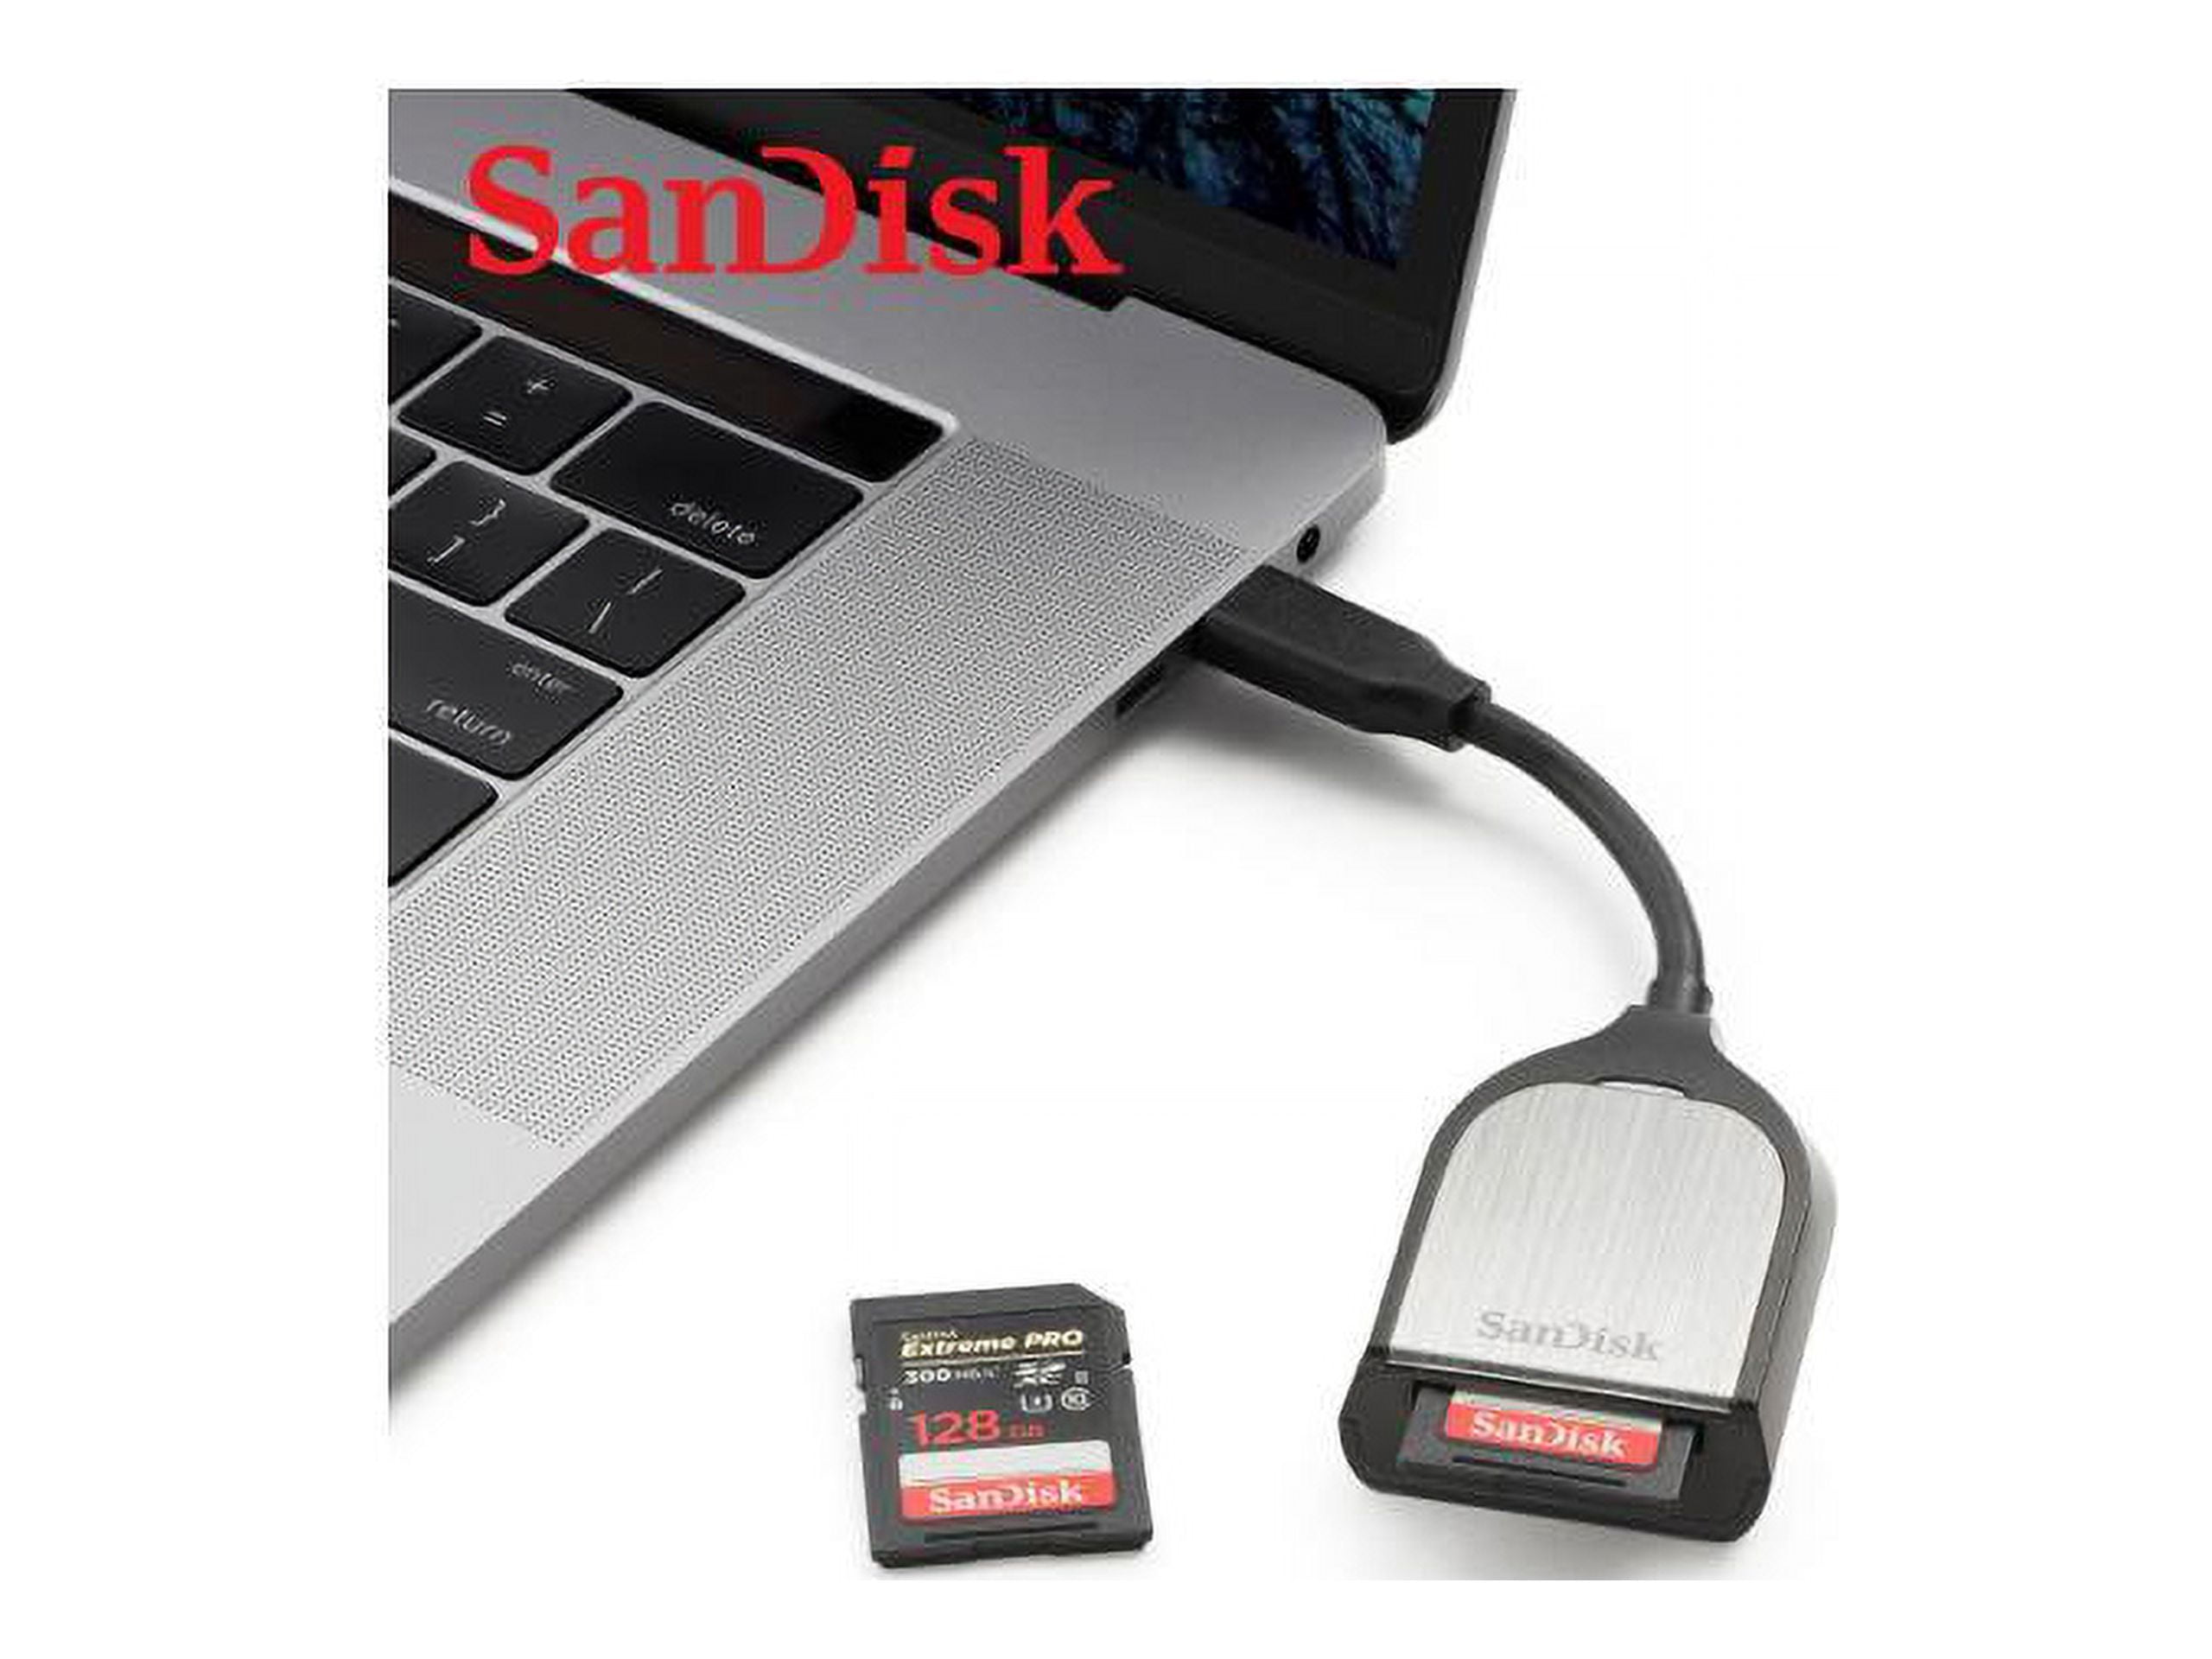 SanDisk Extreme PRO SD UHS-II USB Type-C Card Reader/Writer #SDDR-409-A46 